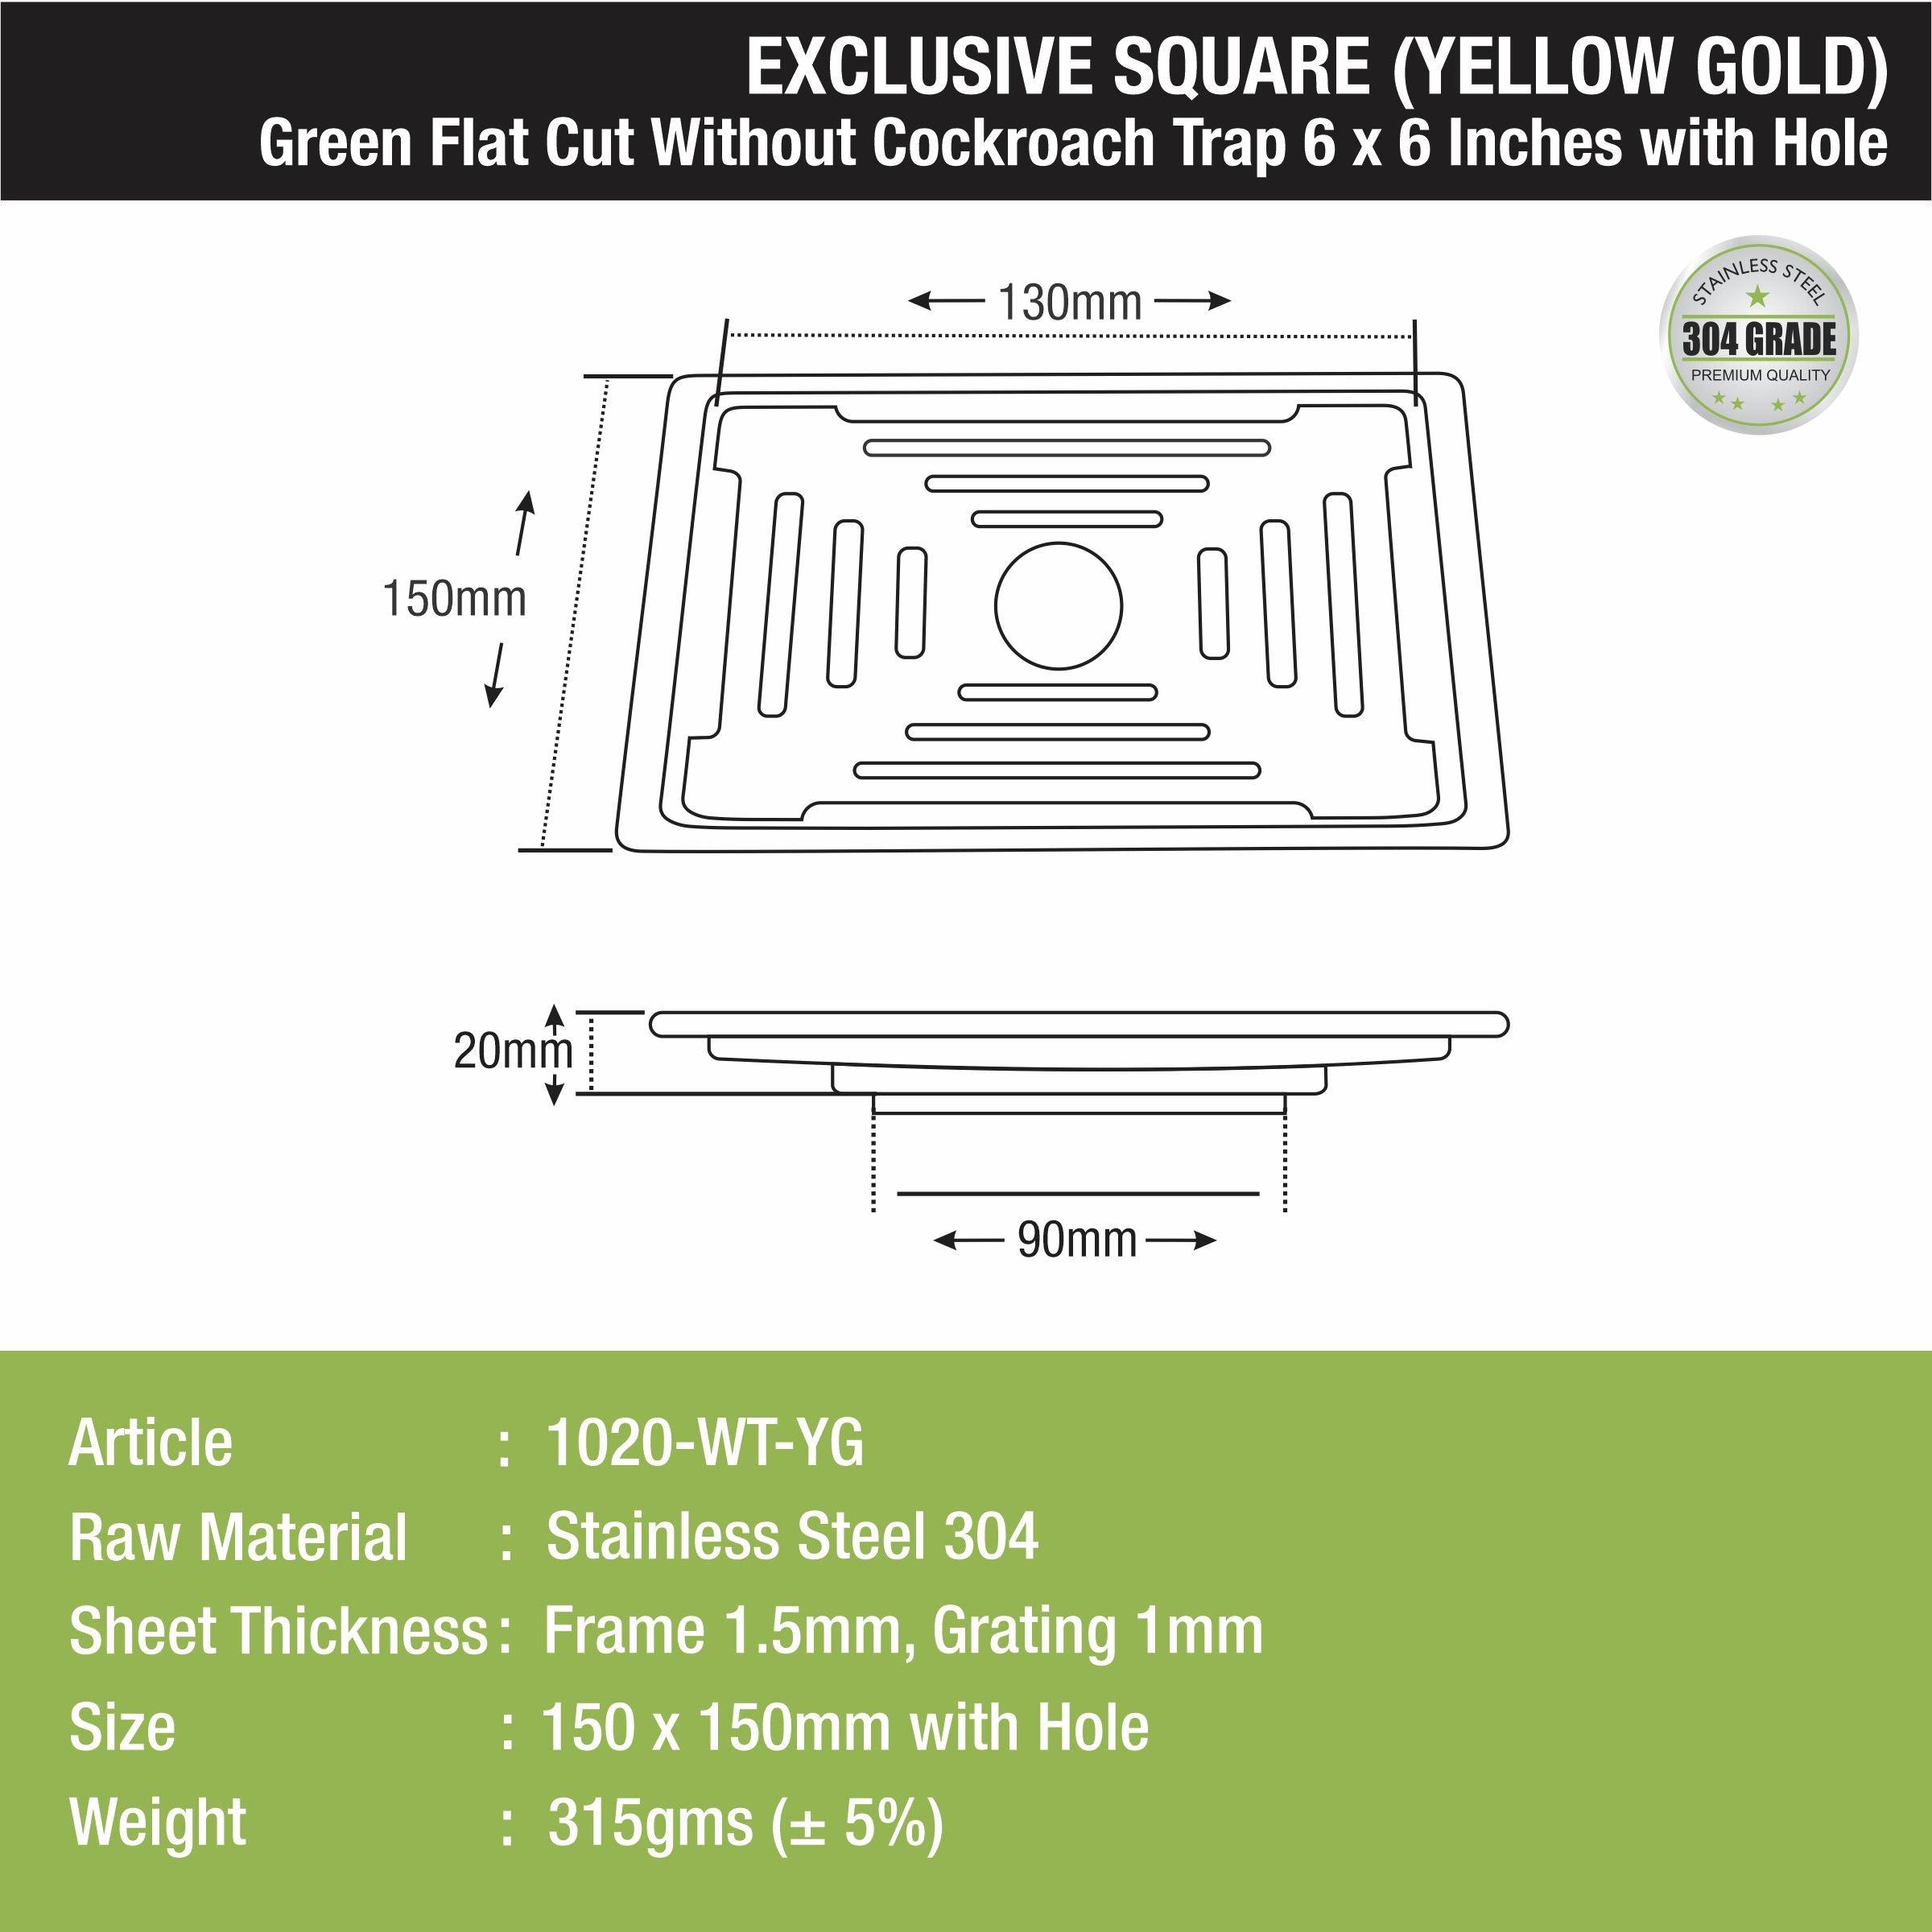 Green Exclusive Square Flat Cut Floor Drain in Yellow Gold PVD Coating (6 x 6 Inches) with Hole - LIPKA - Lipka Home